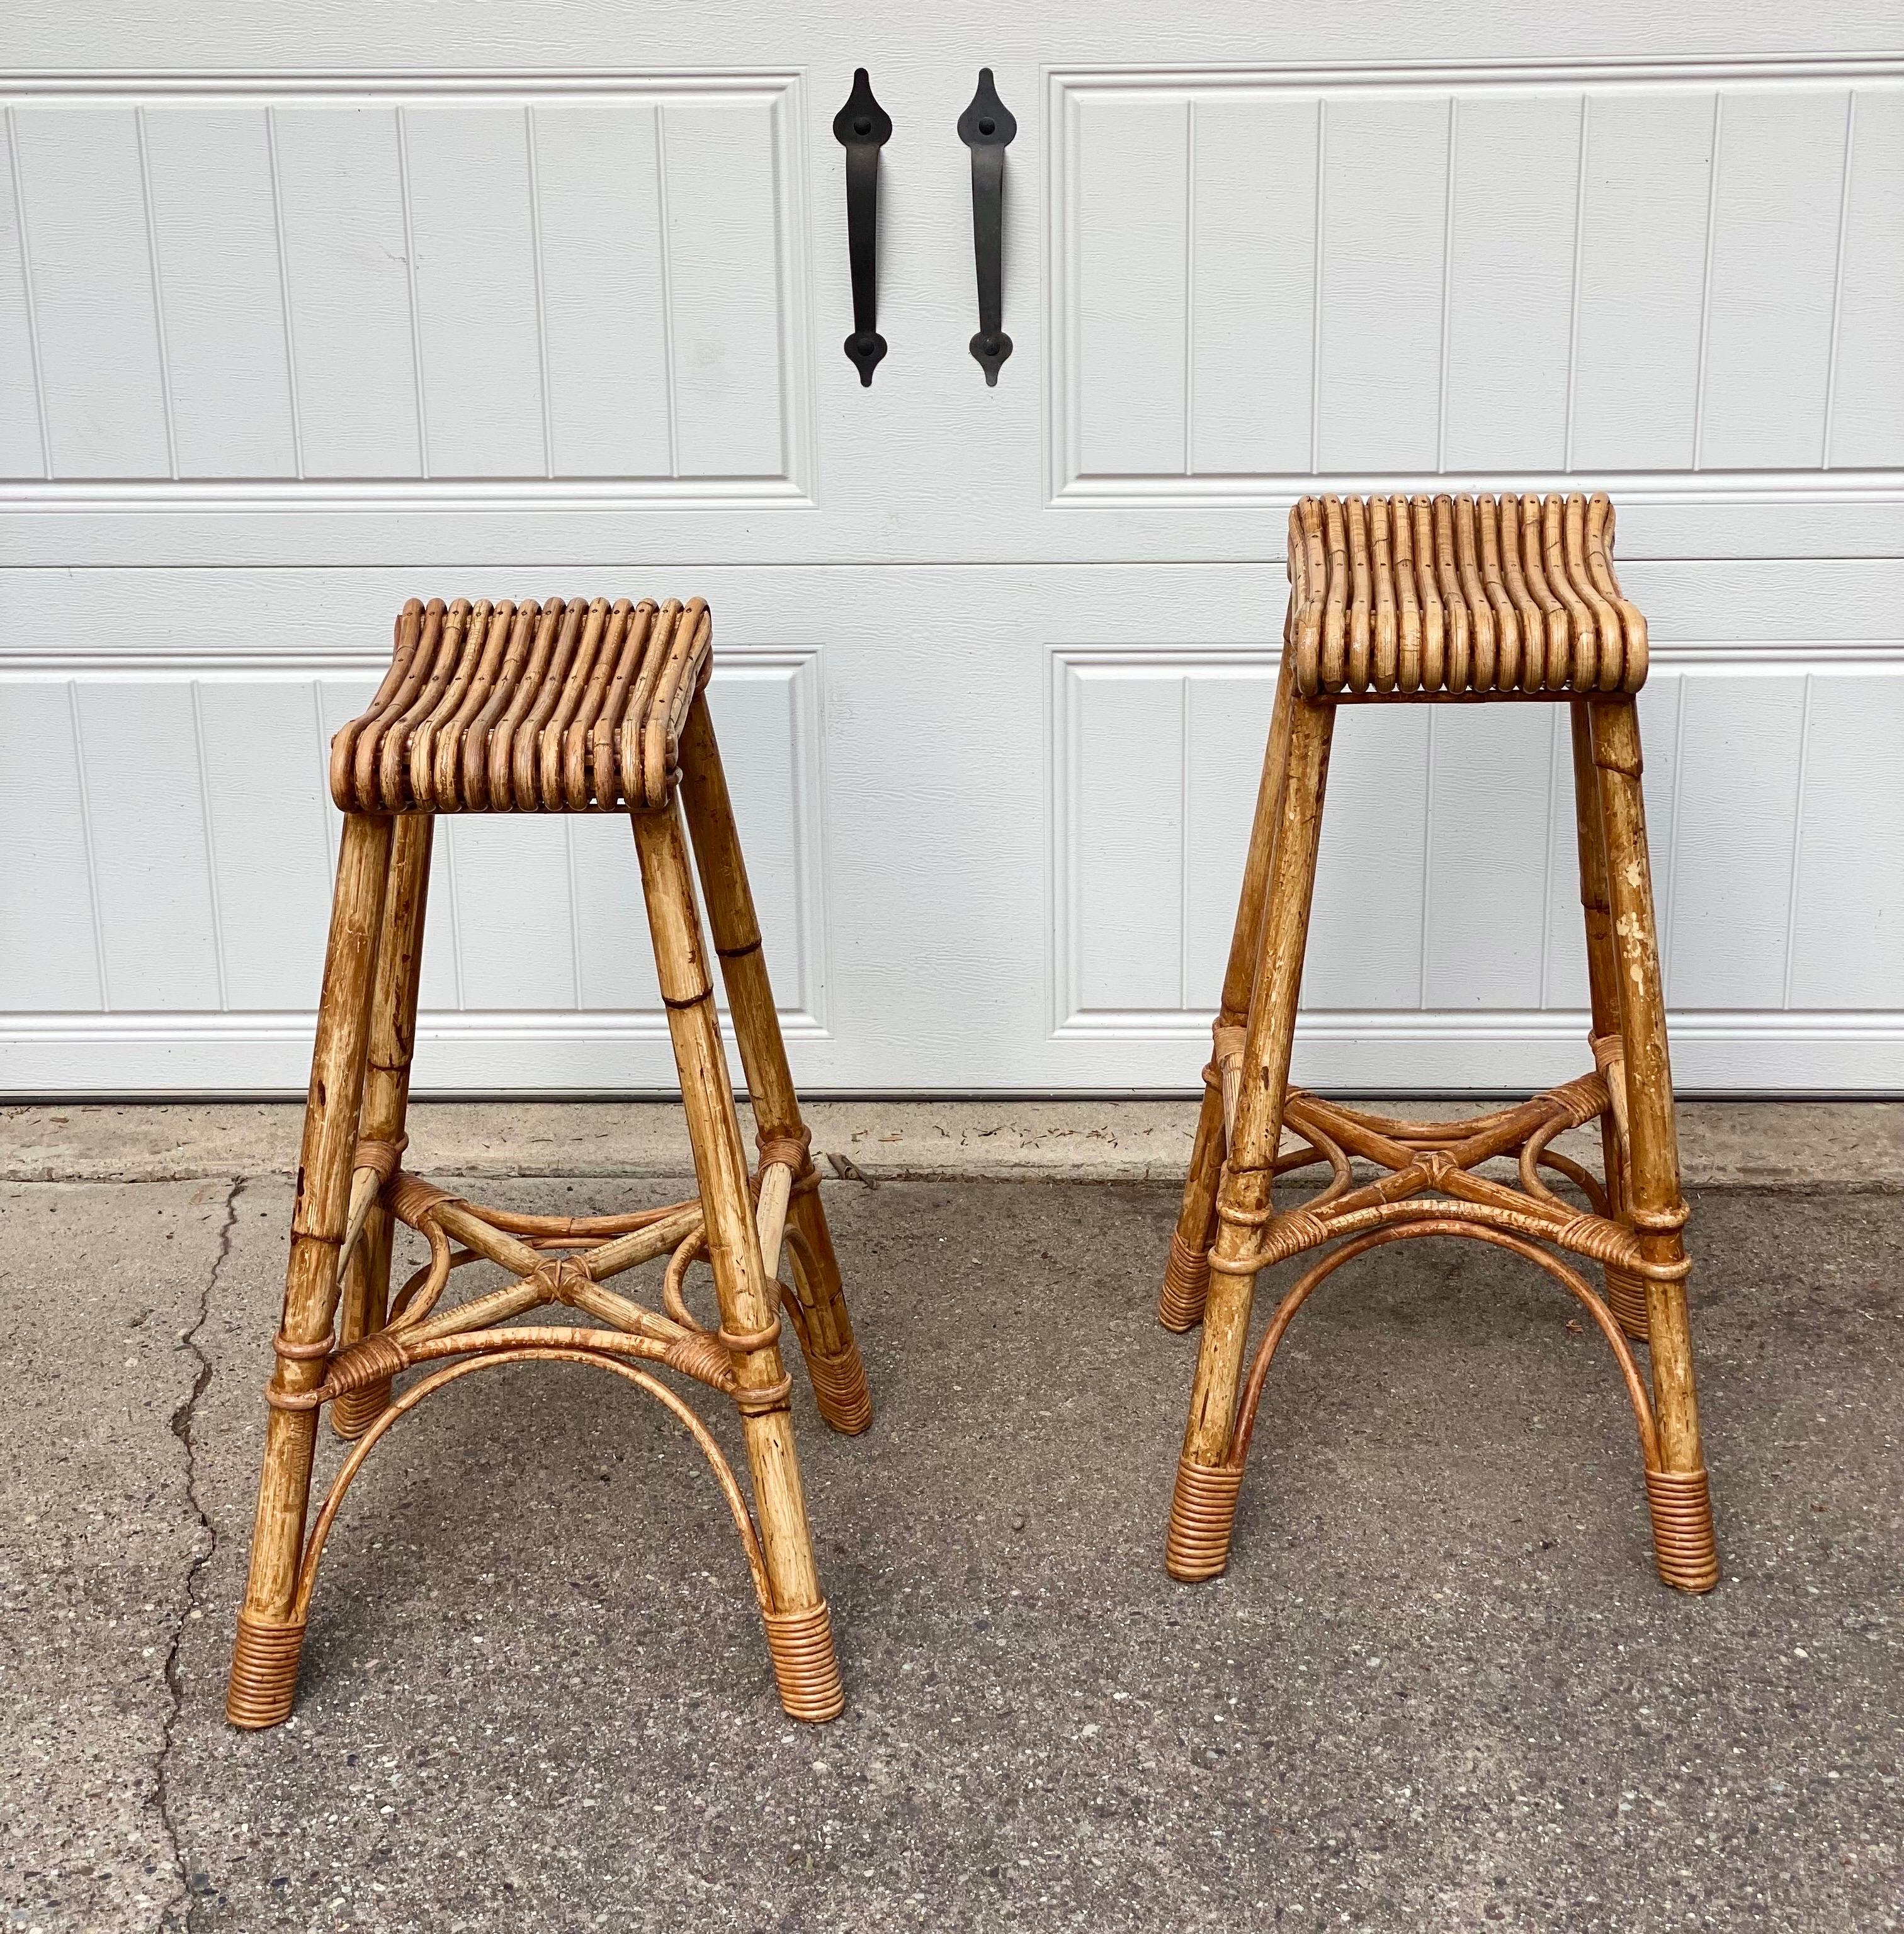 Organic Modern 1940s Vintage English Bamboo Bar Stools – a Pair For Sale